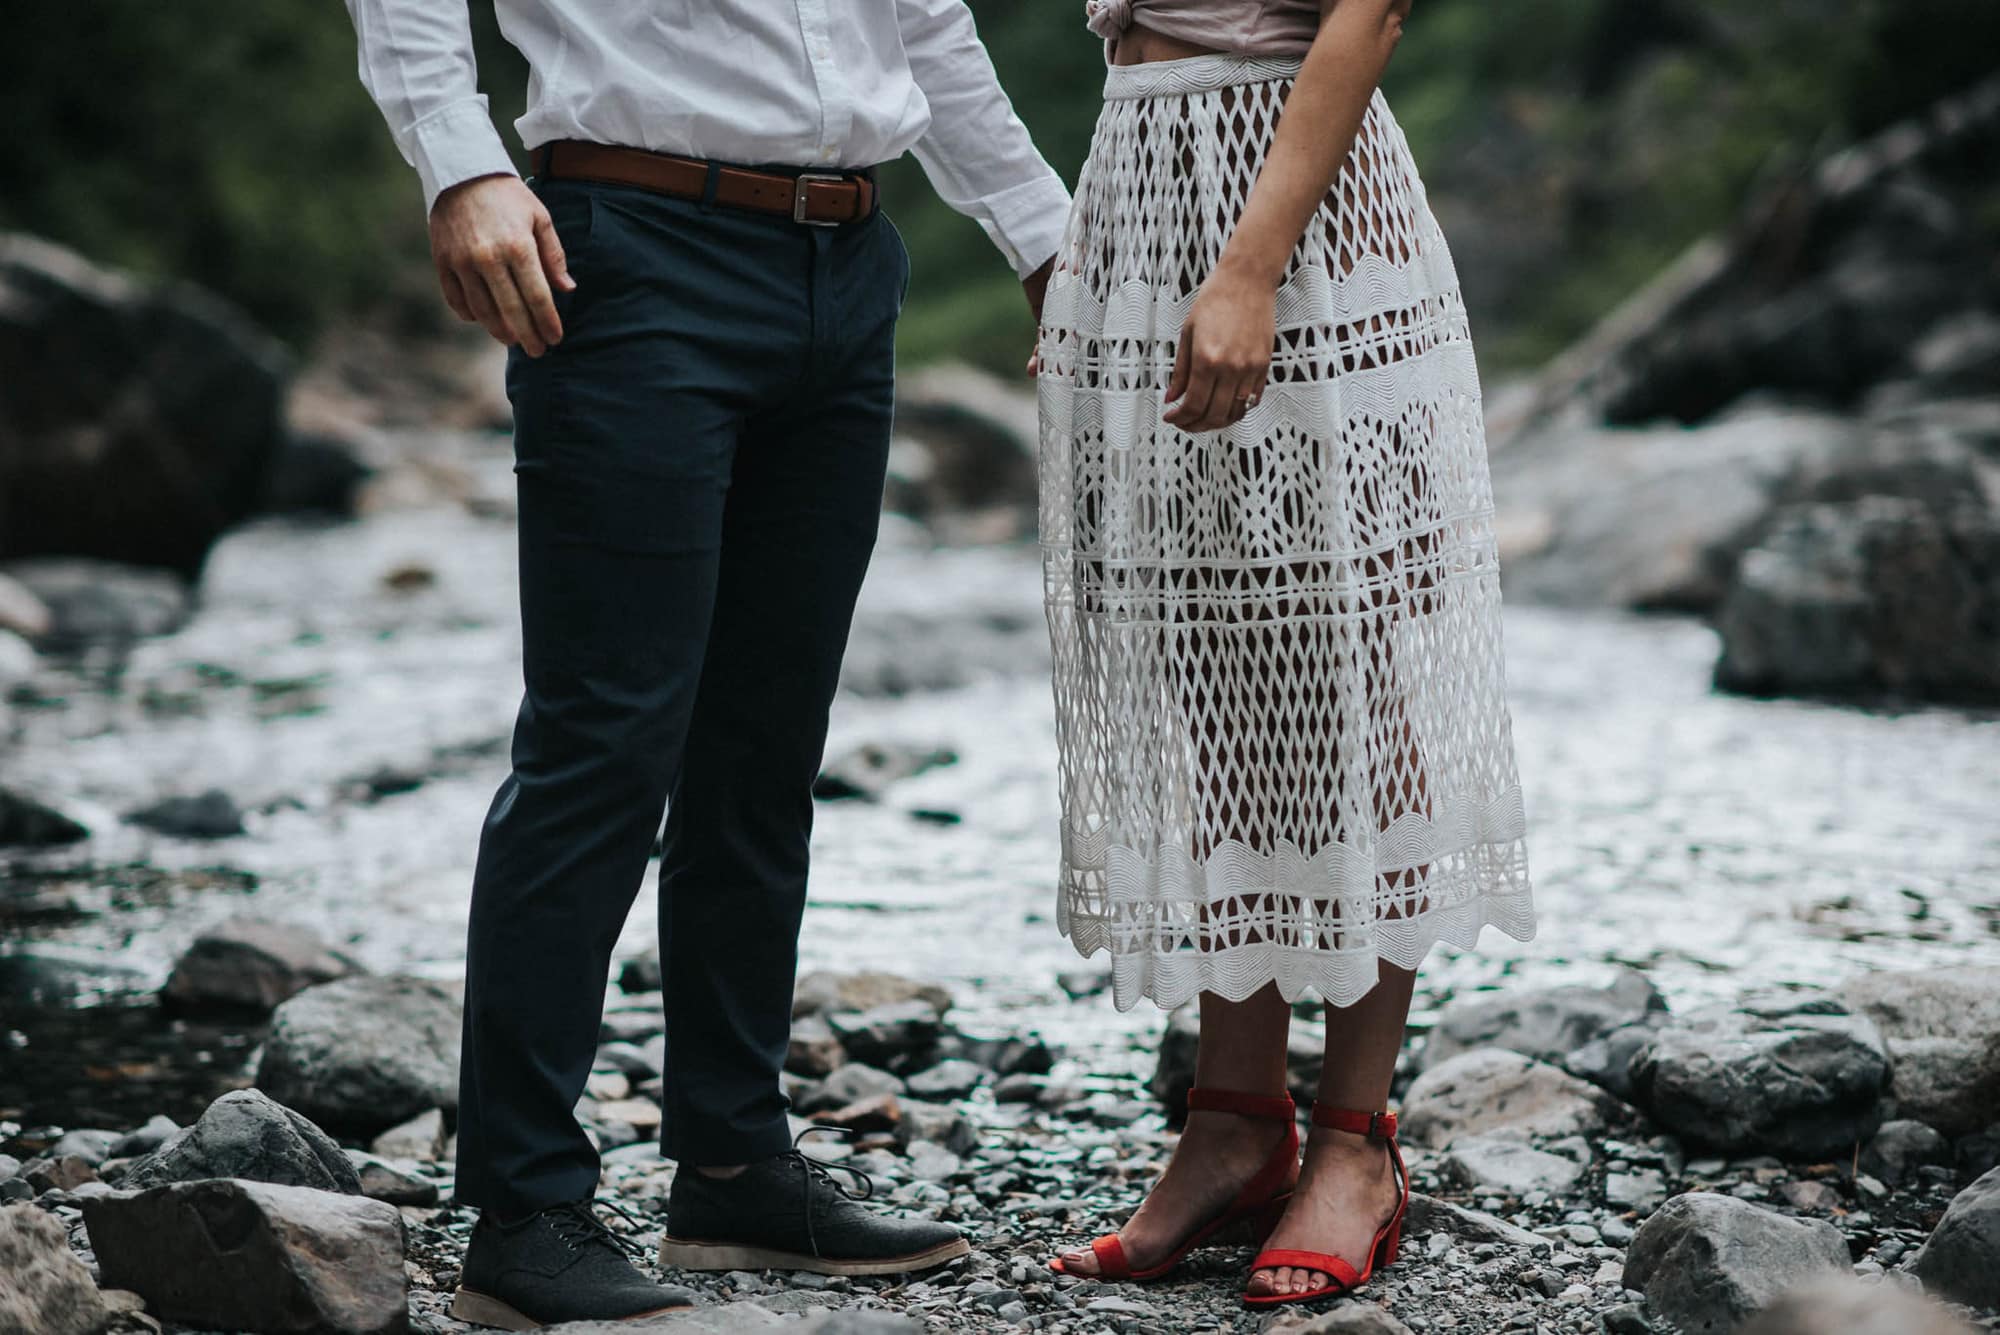 This is a photo of an adventurous couples engagement session at franklin falls in snoqualmie washington